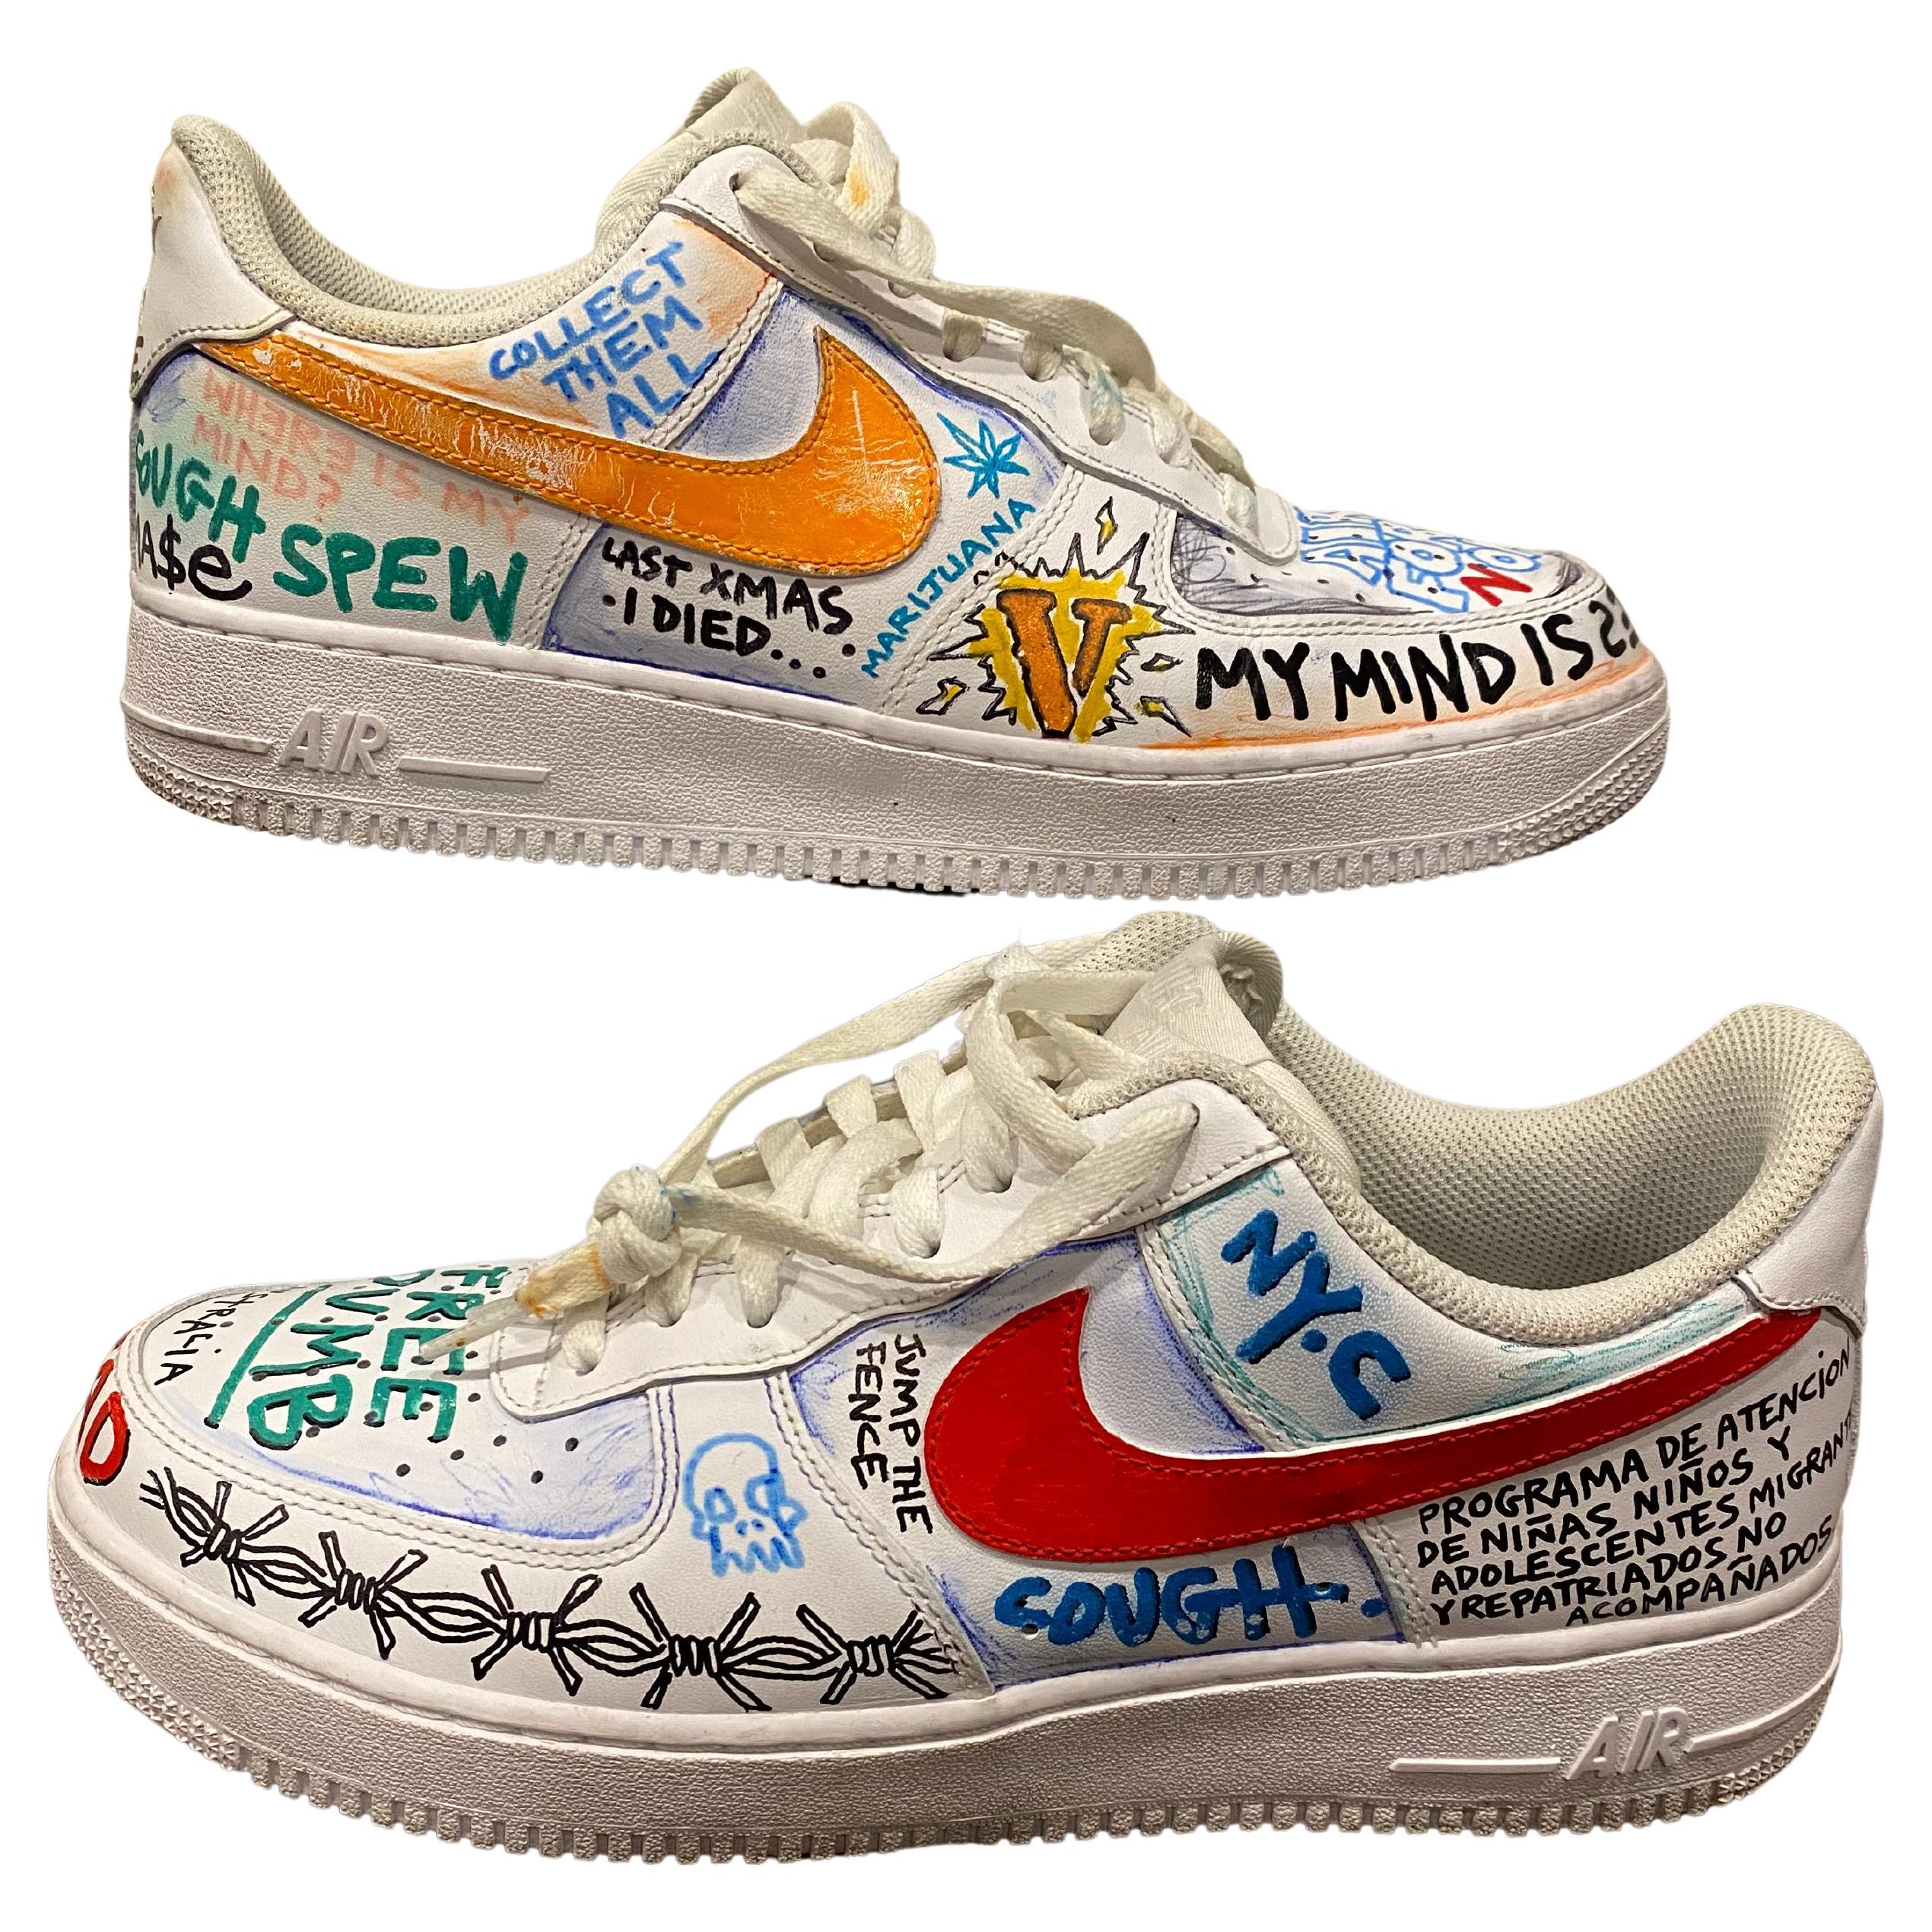 Vlone x Pauly x Nike Air Force 1 Low “Mase” at 1stDibs | vlone pauly air  force 1, vlone x pauly af1, off white vlone 1s